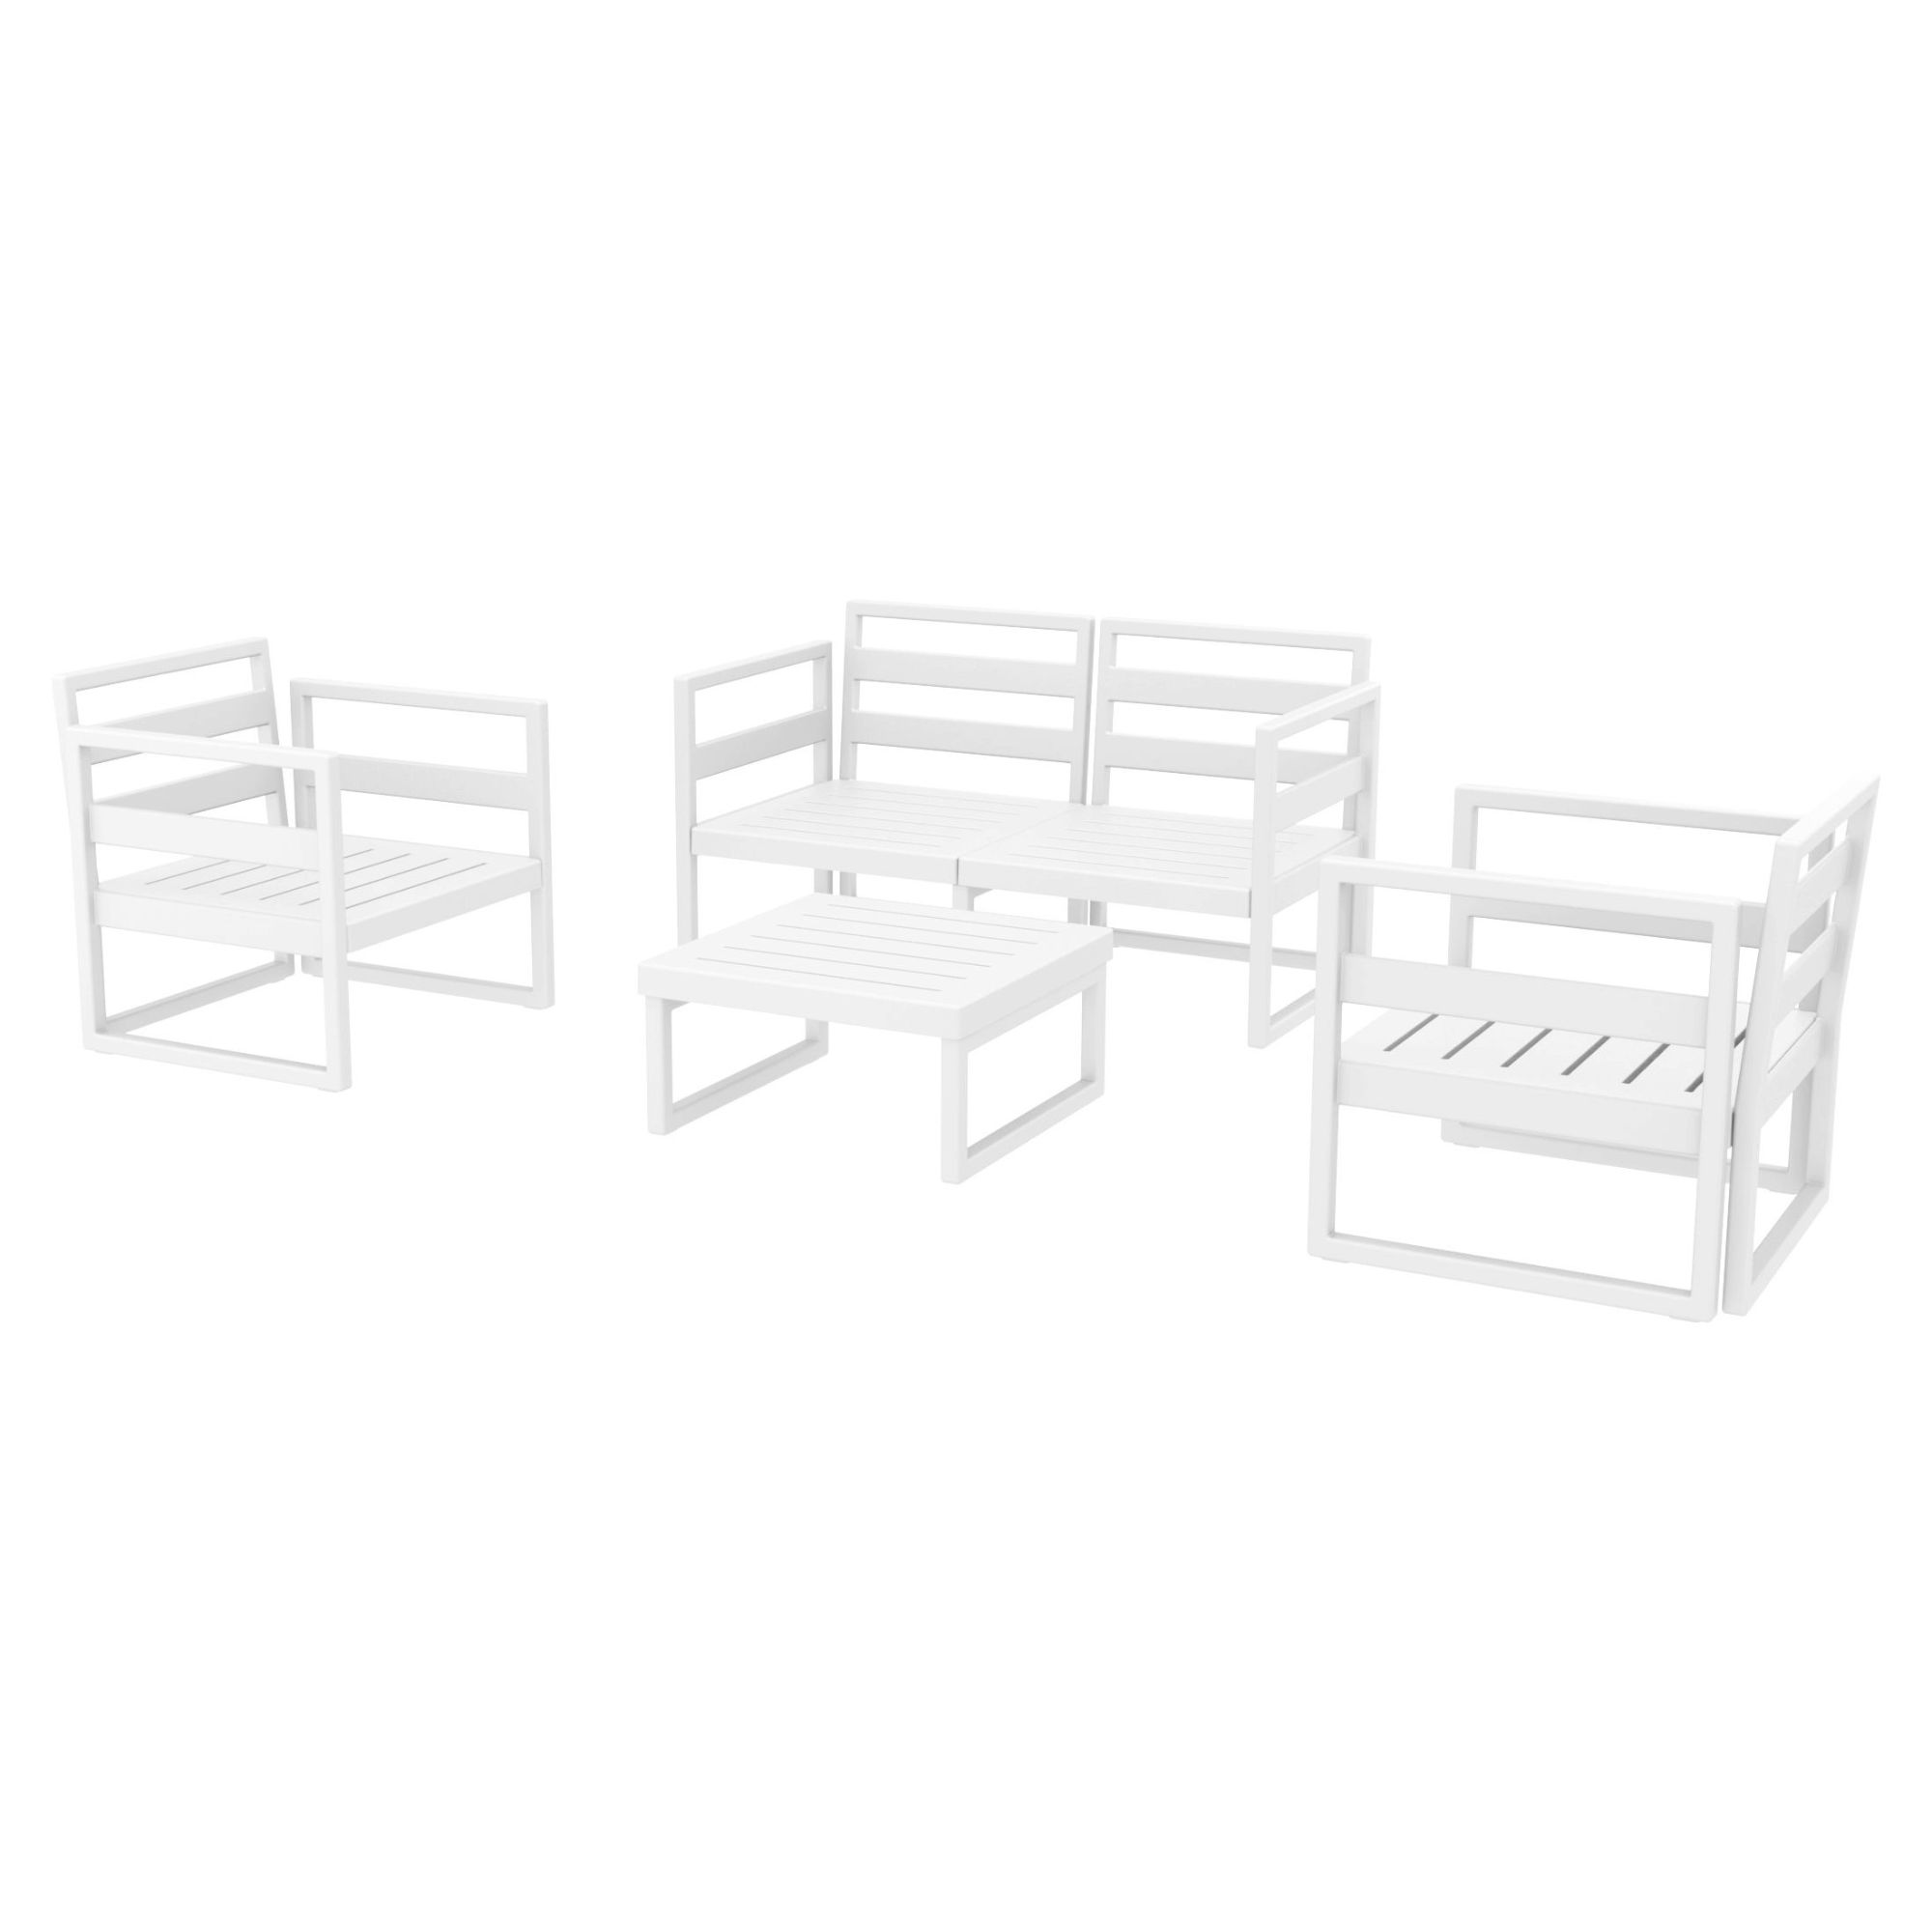 4 Piece White Outdoor Patio Lounge Set with Natural Sunbrella Cushion 54.5" - image 2 of 3